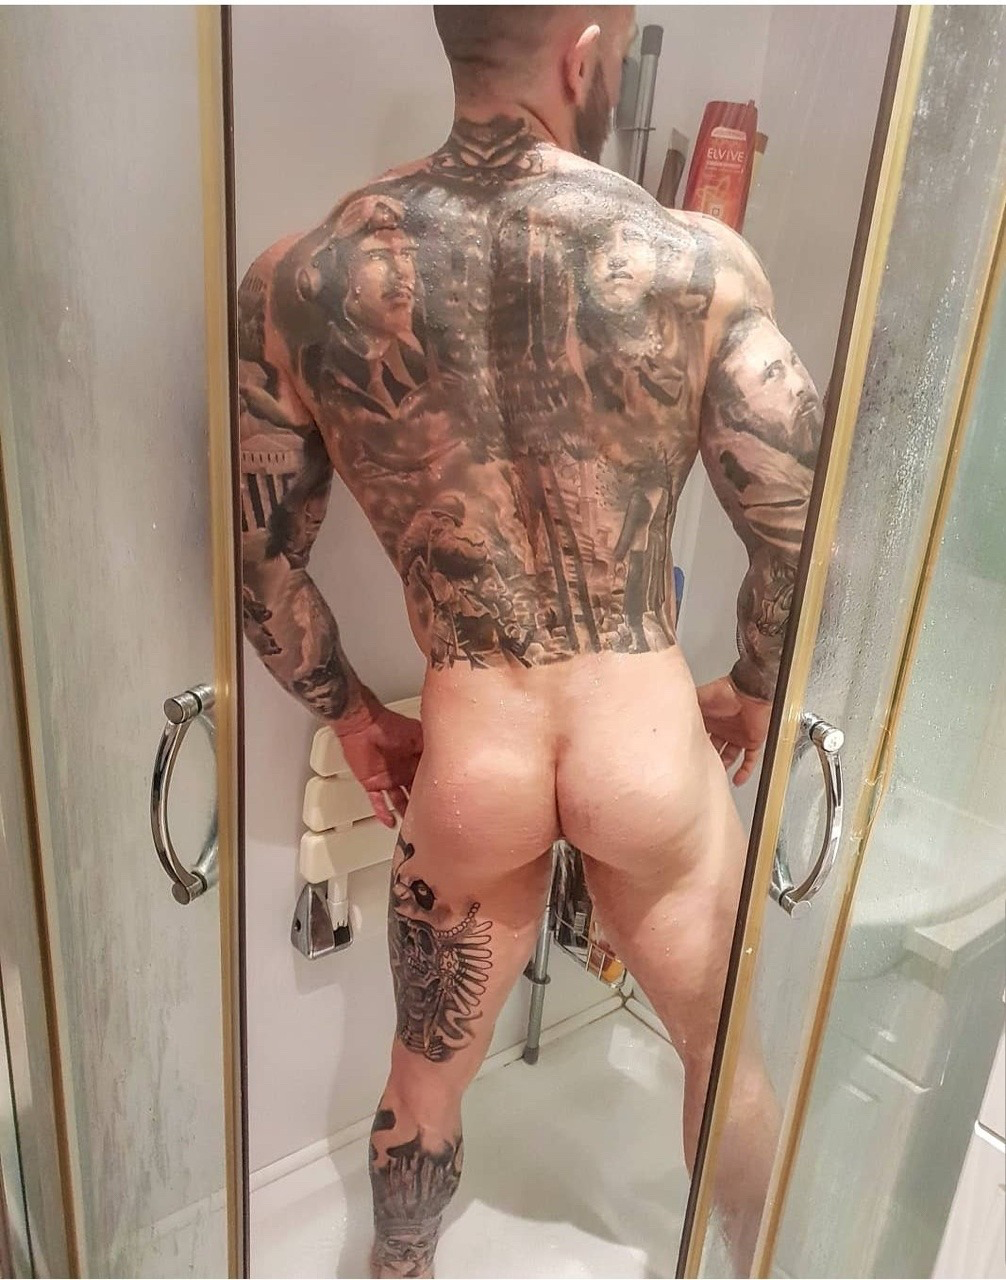 Photo by Smitty with the username @Resol702,  January 7, 2020 at 11:51 PM. The post is about the topic Tattooed Naked Men